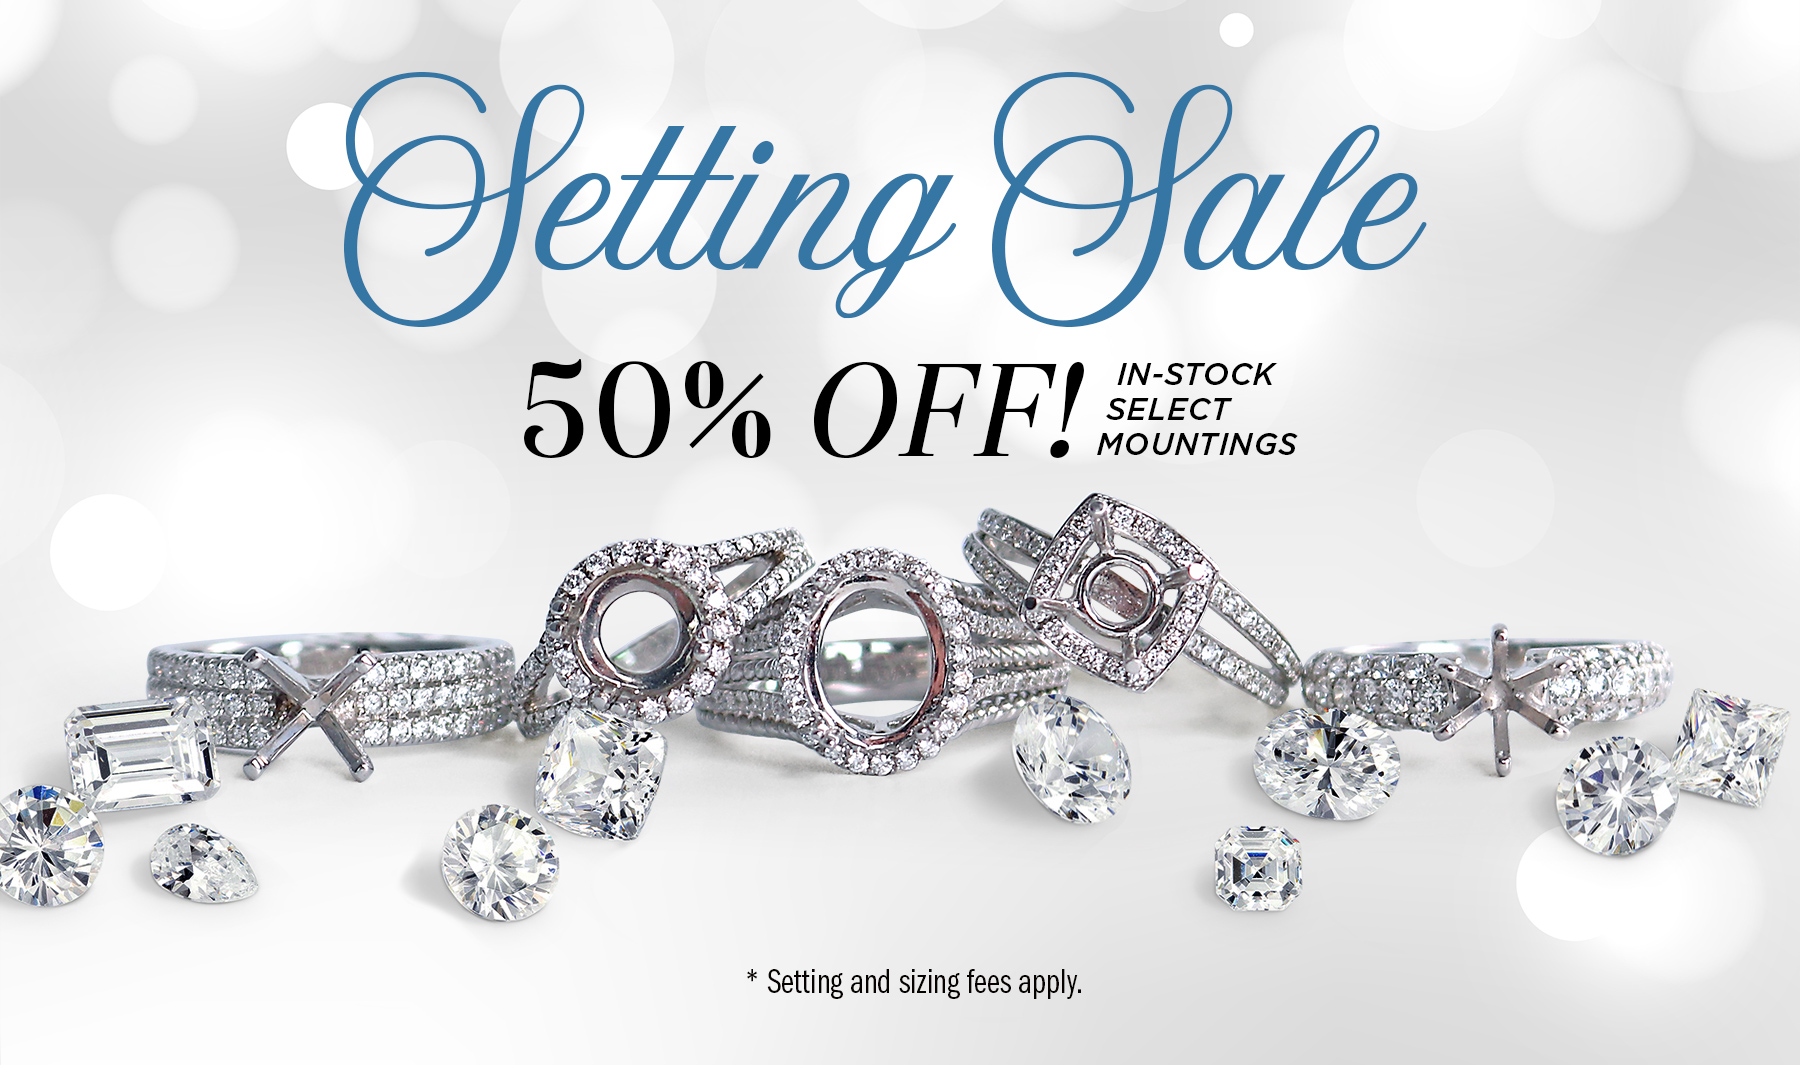 Setting Sale - 50% OFF Select Mountings